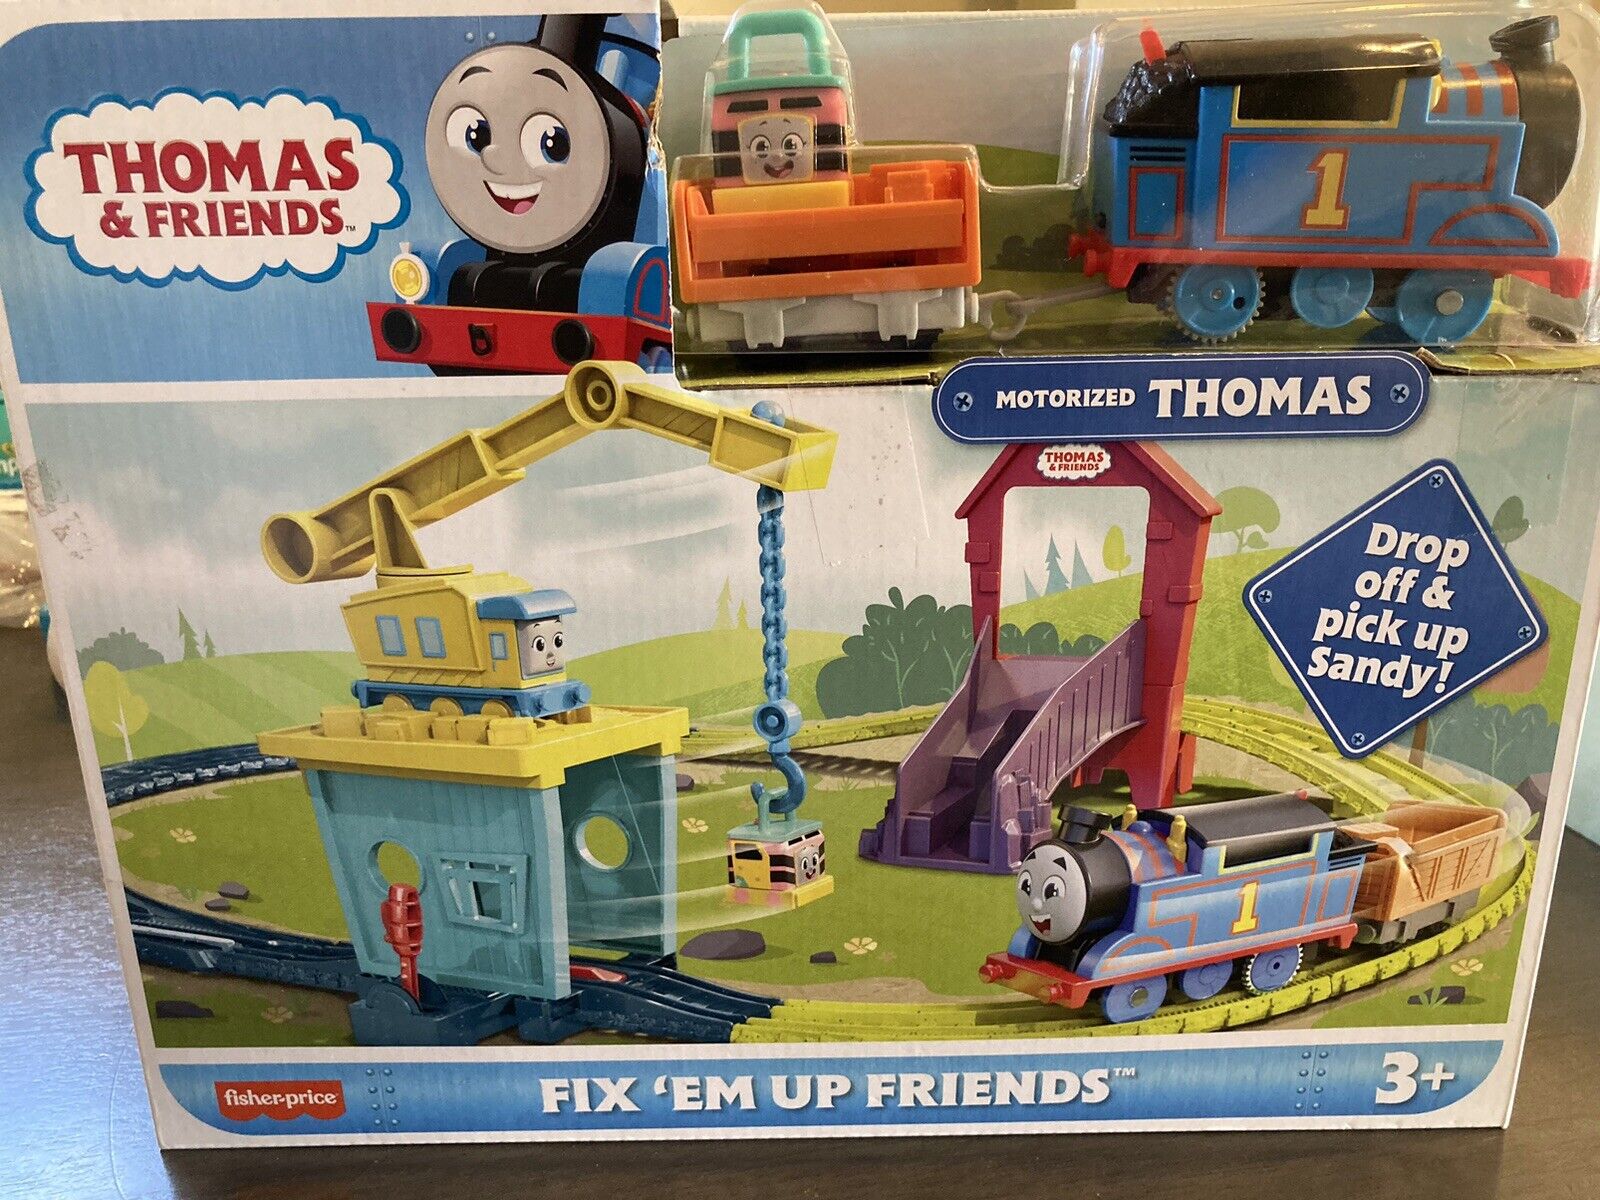 Thomas & Friends Fix 'em Up Friends Train and Track Set with Motorized Thomas 